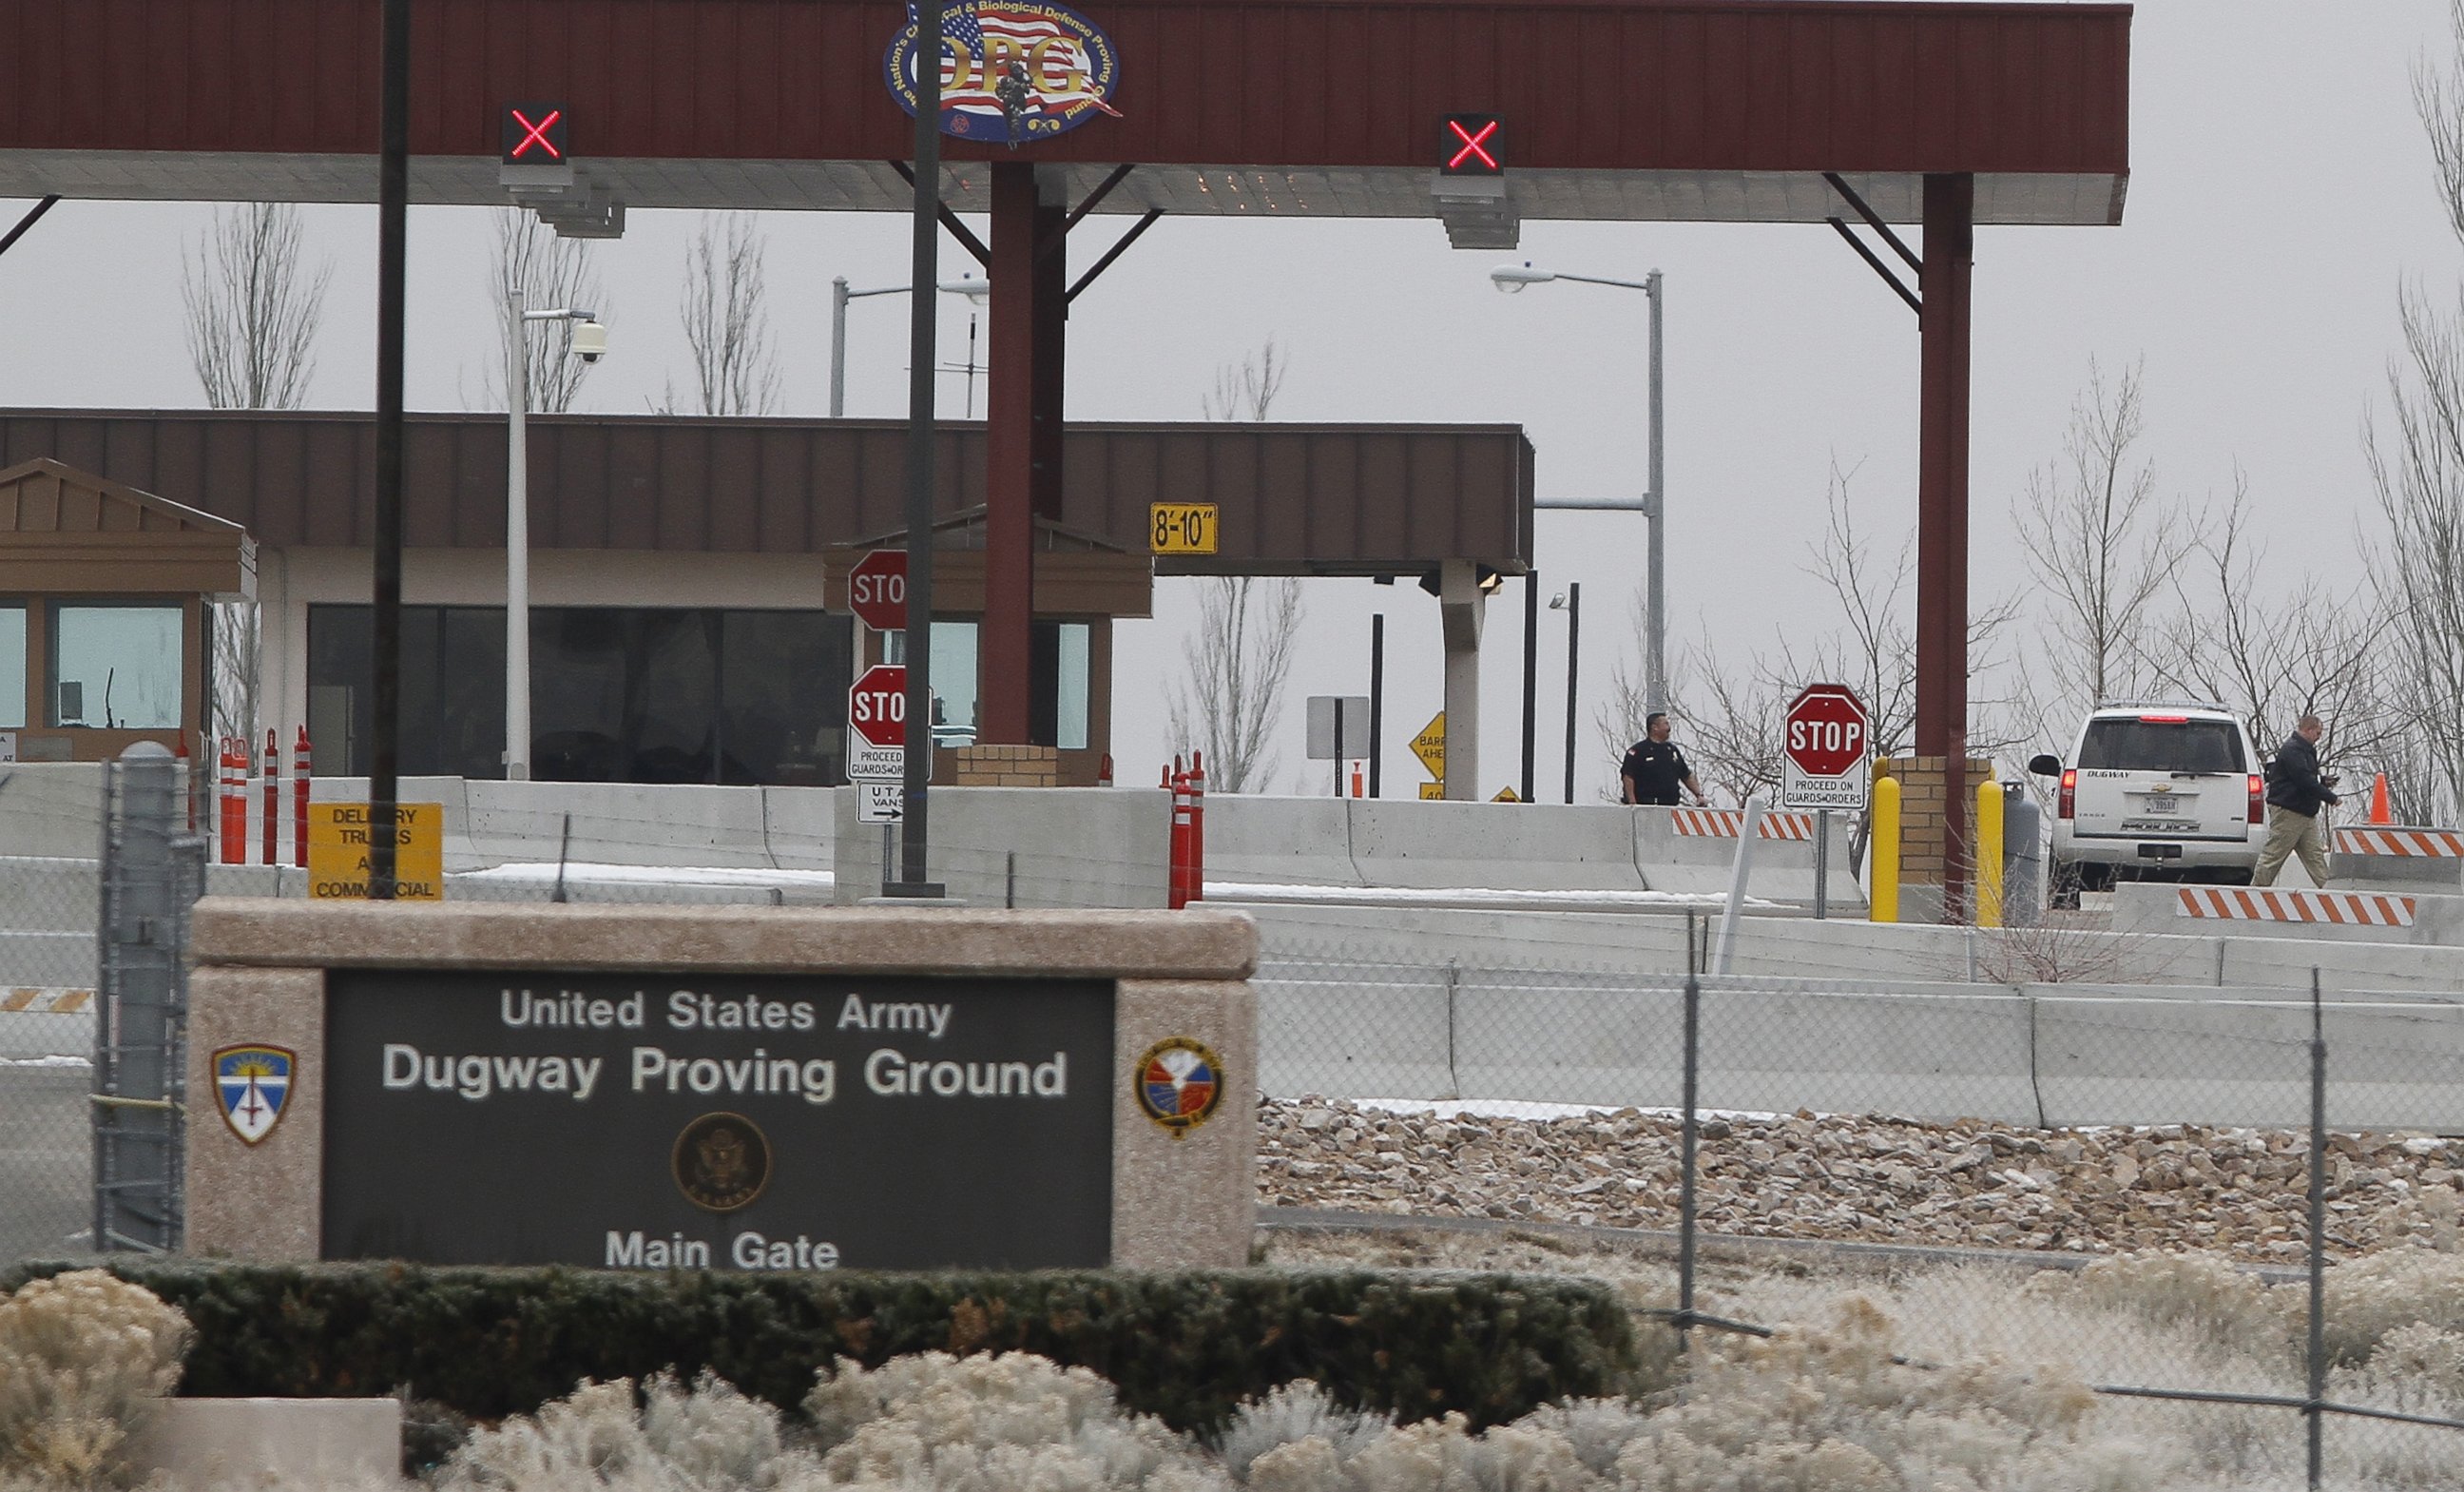 PHOTO: A Jan. 27, 2010 file photo shows the main gate at Dugway Proving Ground military base, about 85 miles southwest Salt Lake City, Utah.